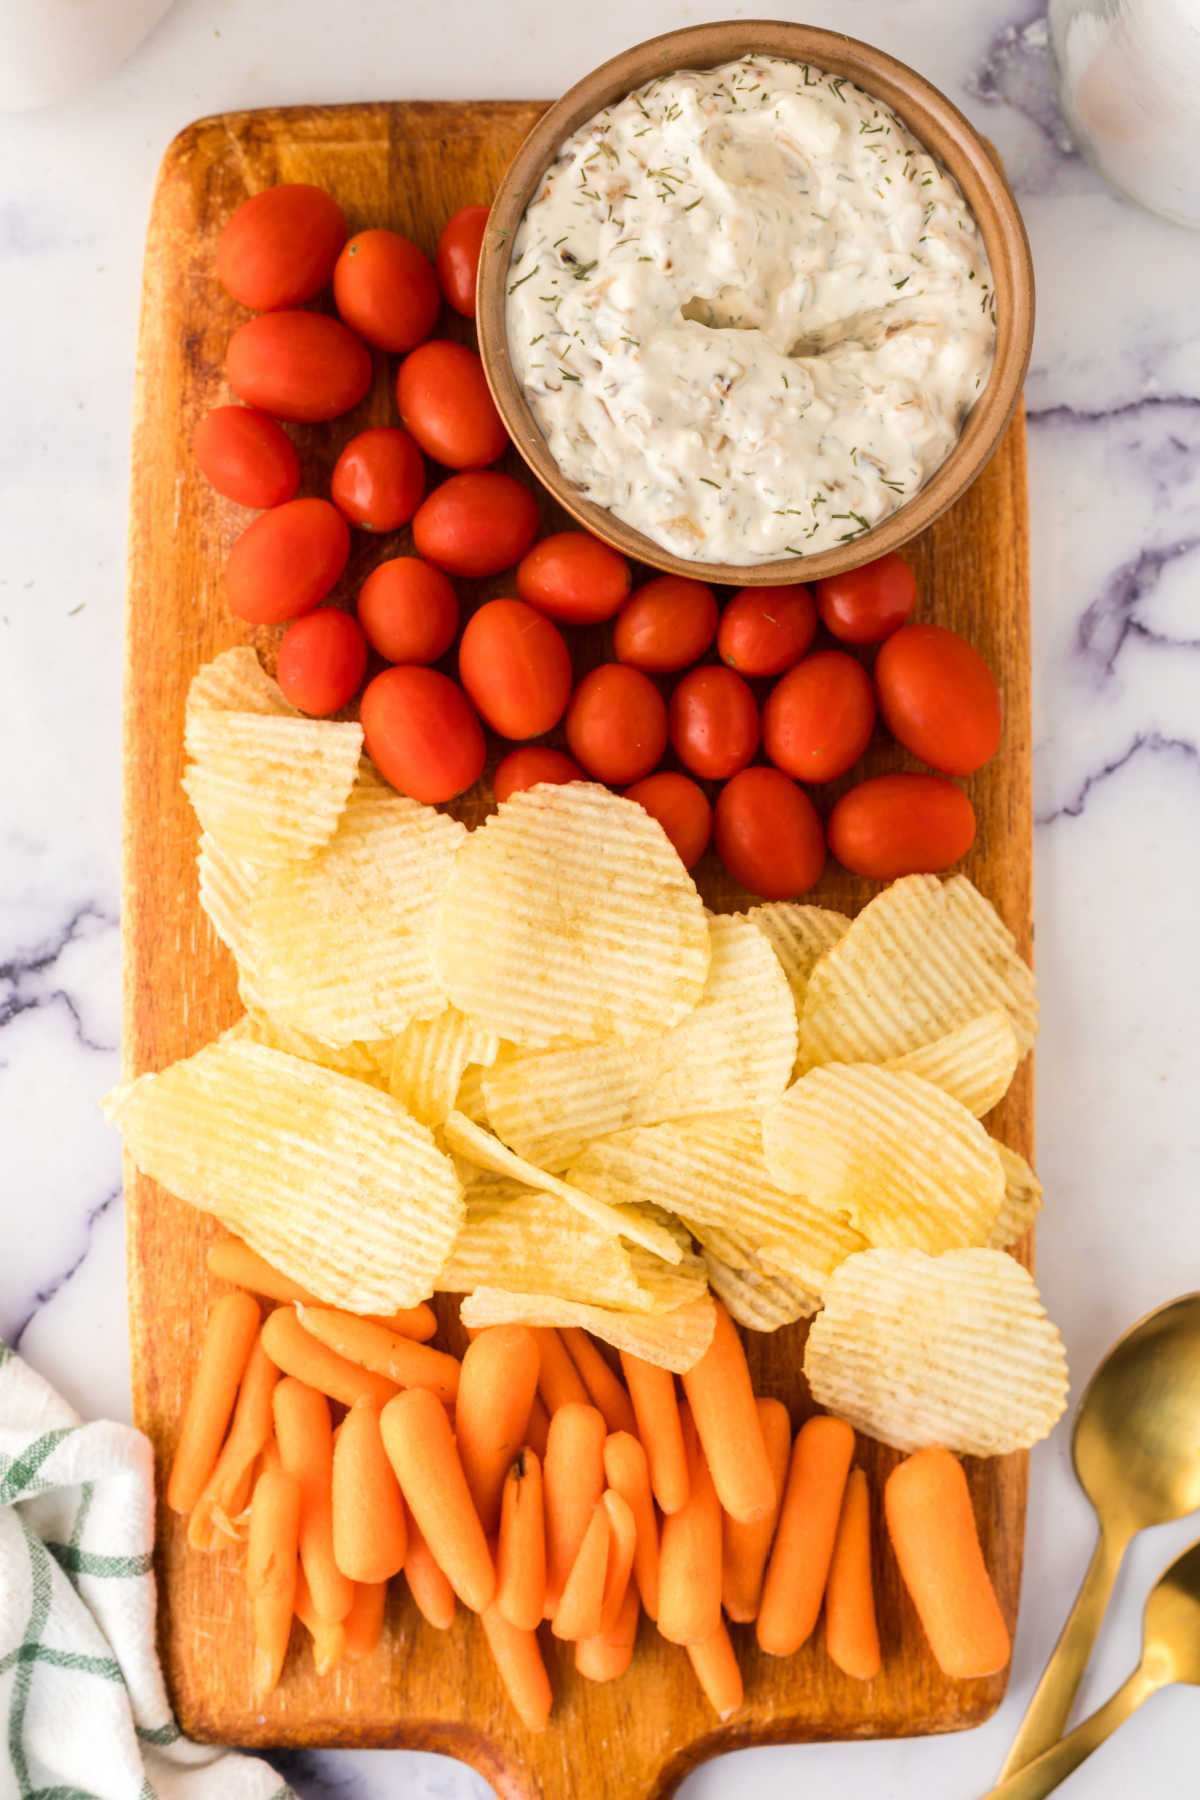 Snack board with bowl of caramelized onion dip, cherry tomatoes, potato chips, and baby carrots.